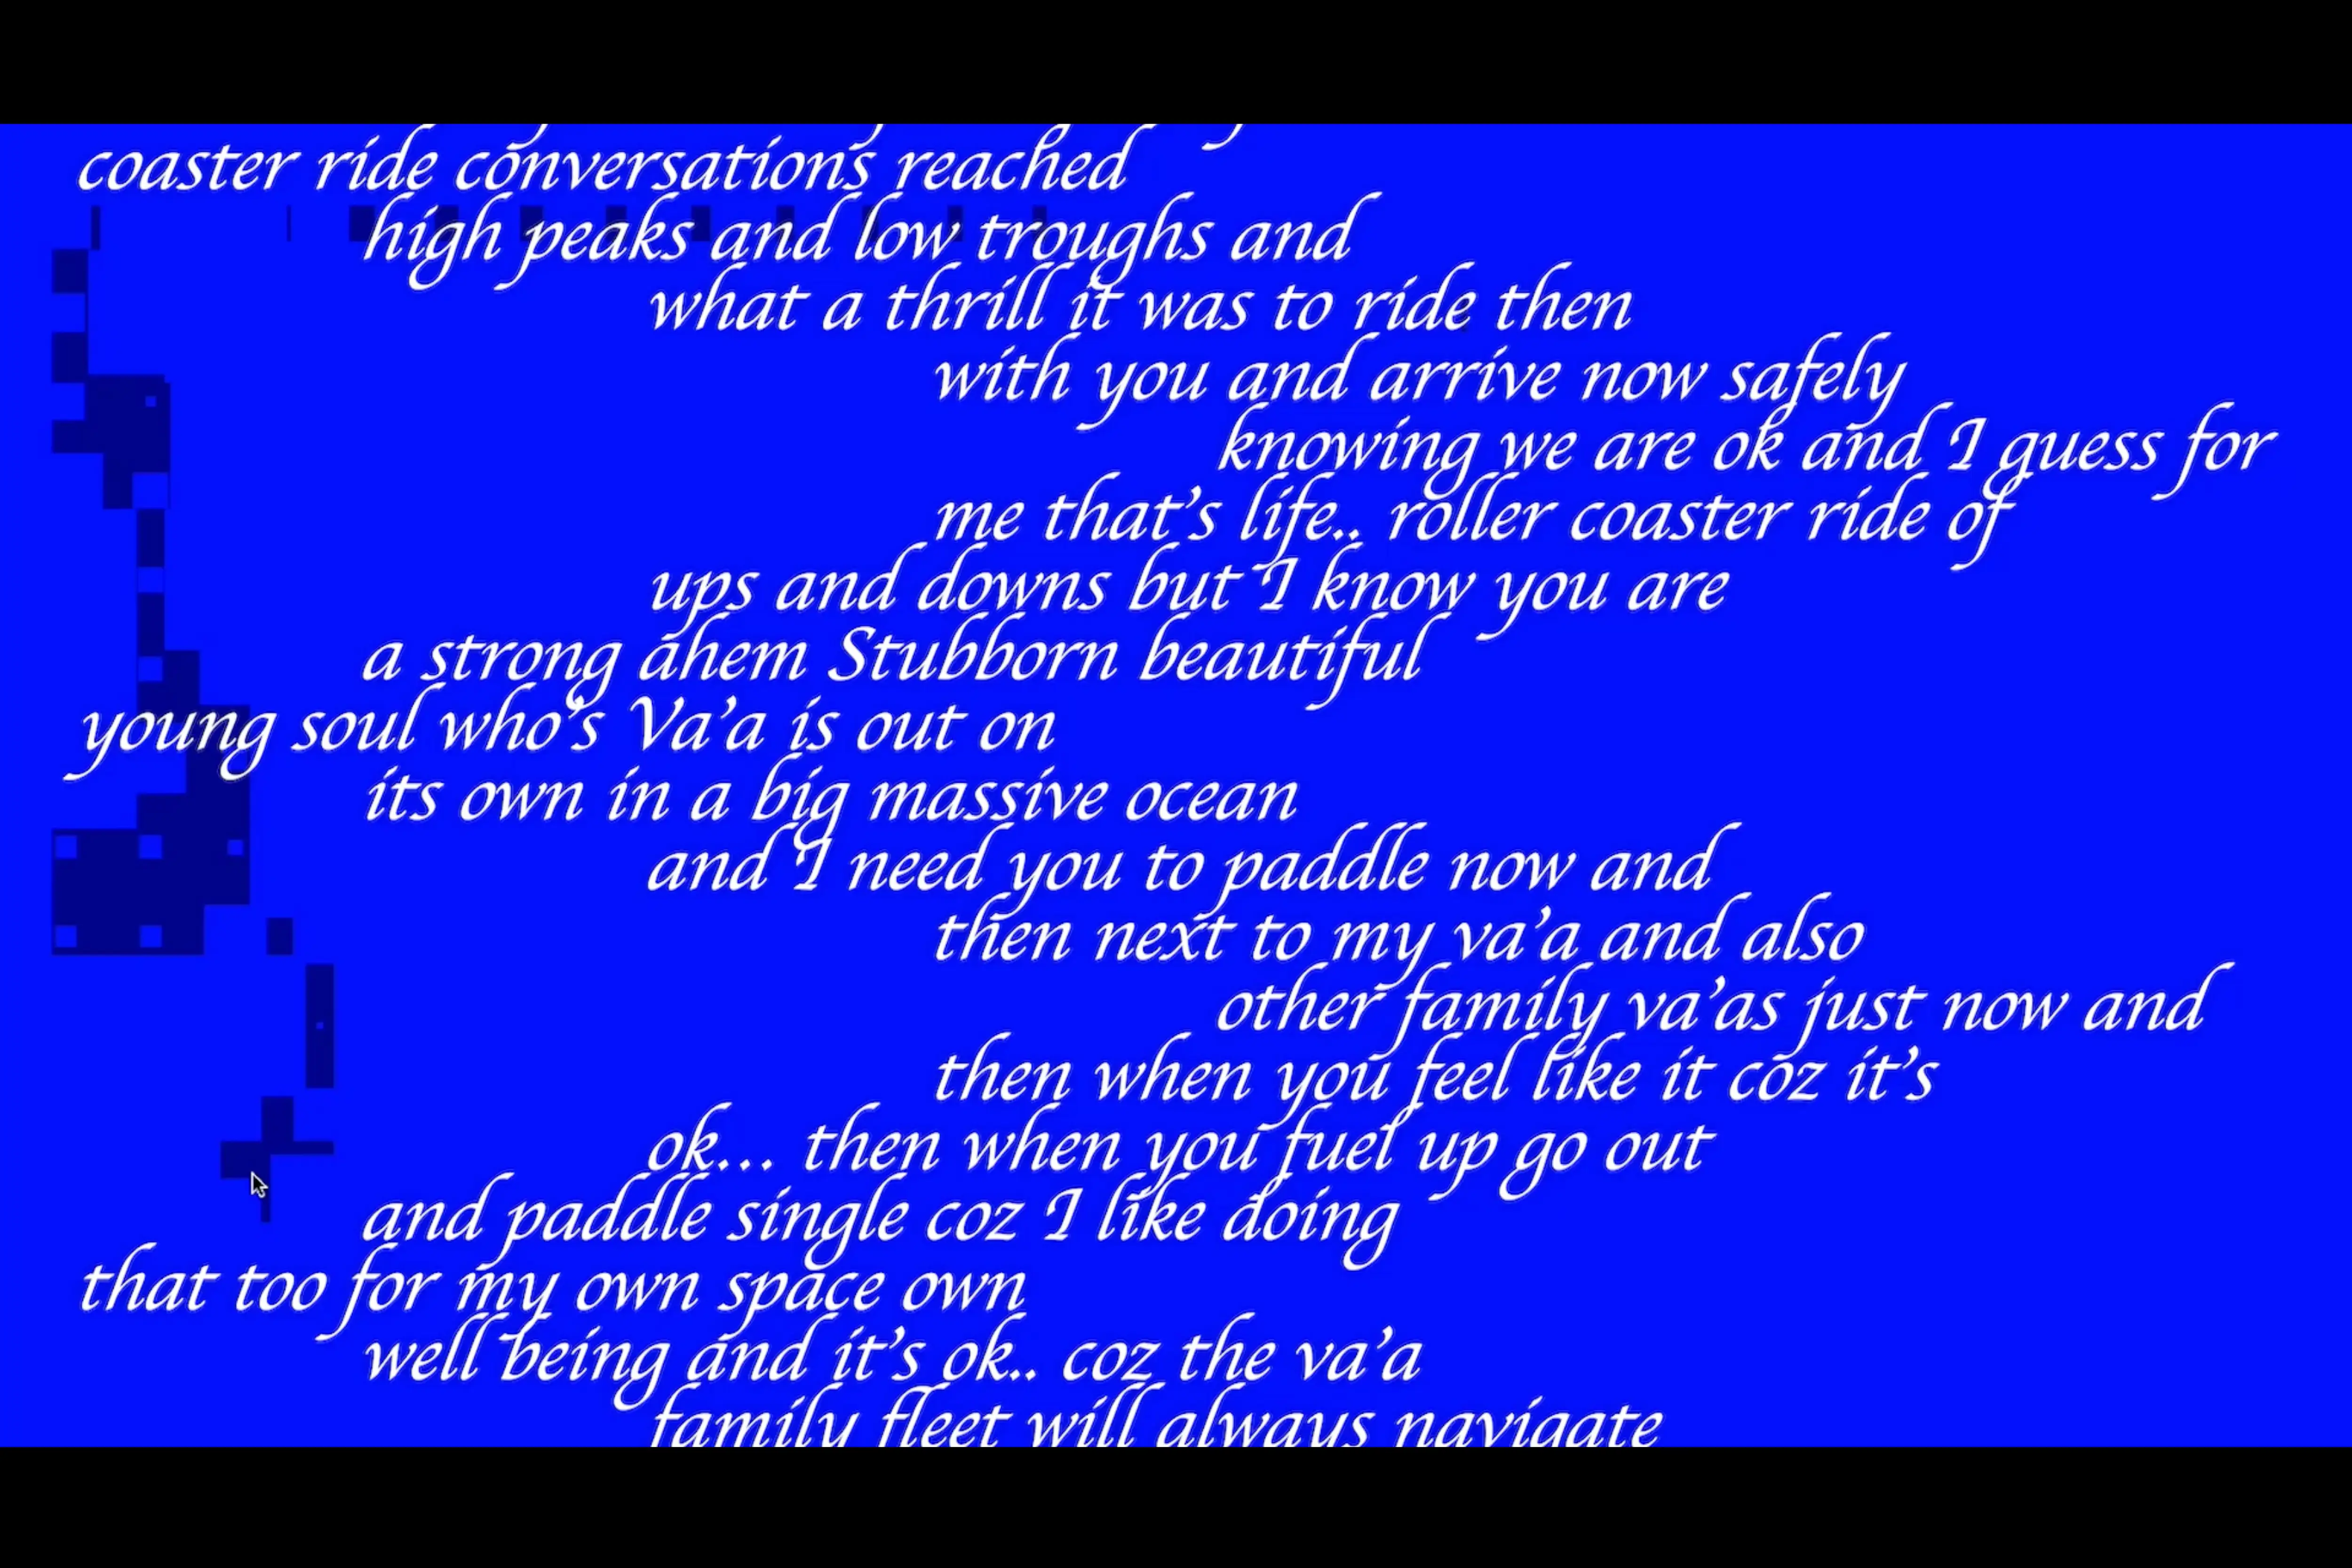 A bright blue background is broken up in one section by a mouse arrow, revealings small parts of a darker blue beneath. Over the top white text, set in a cascading zigzag depicts a long personal message.